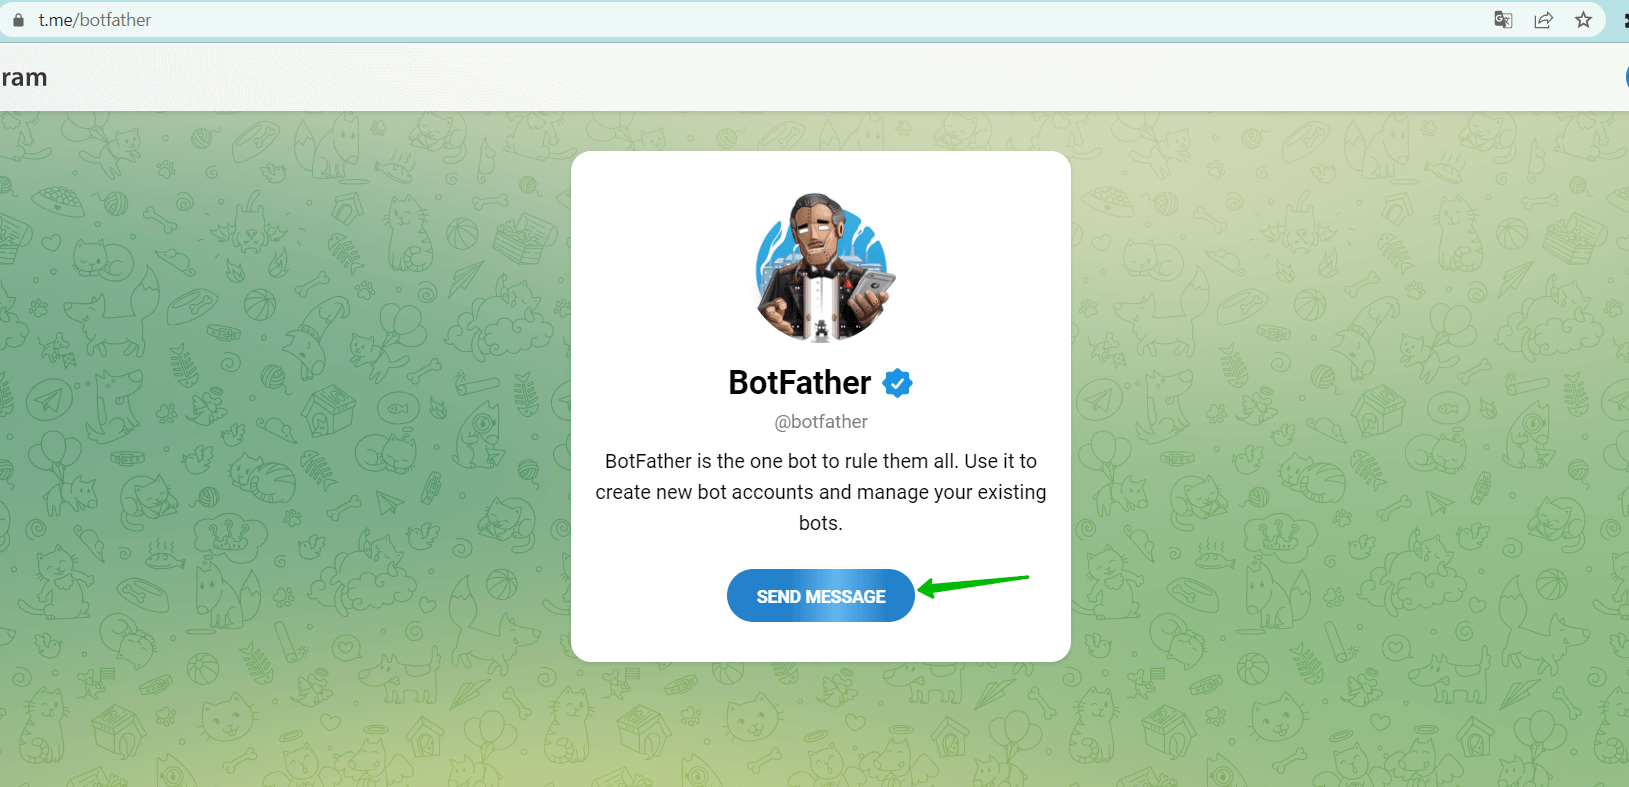 Click Send message to open the BotFather in Telegram on your desktop.